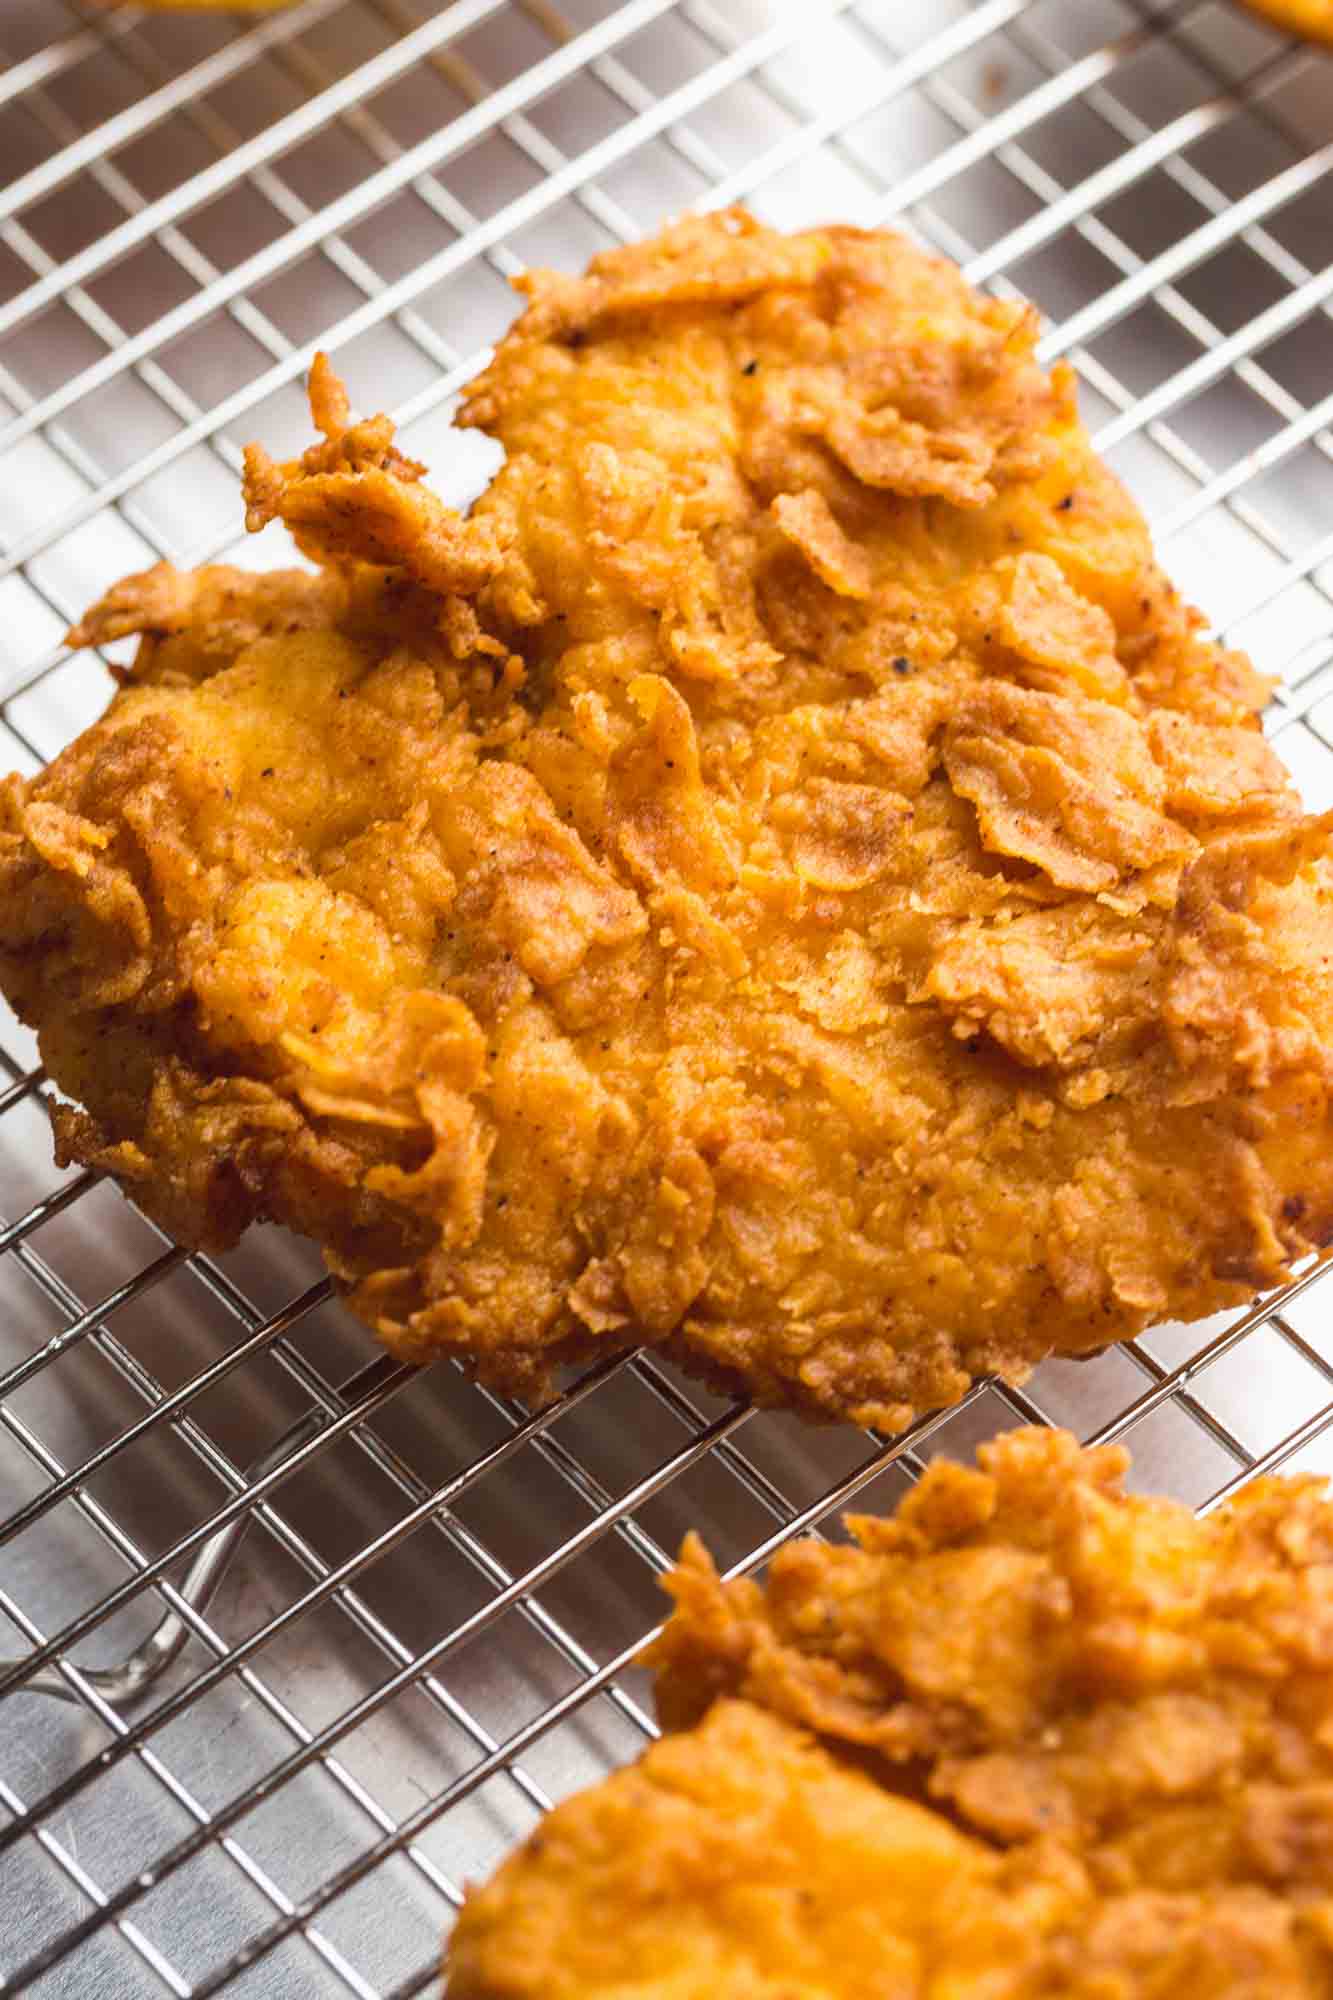 Crispy and flaky fried chicken on a wire rack